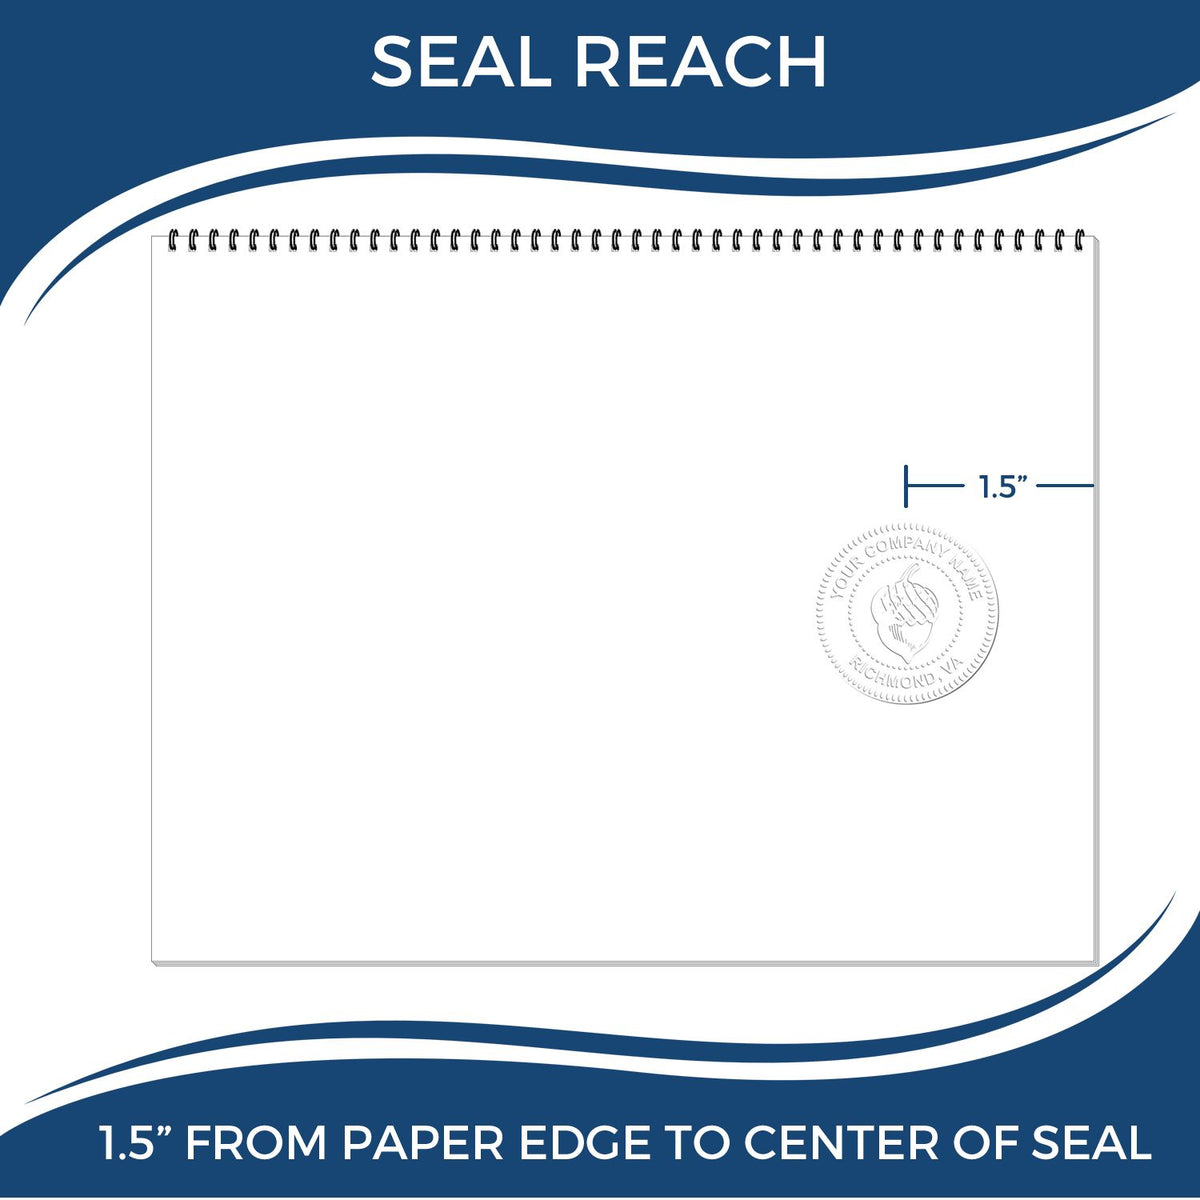 An infographic showing the seal reach which is represented by a ruler and a miniature seal image of the Hybrid Massachusetts Landscape Architect Seal